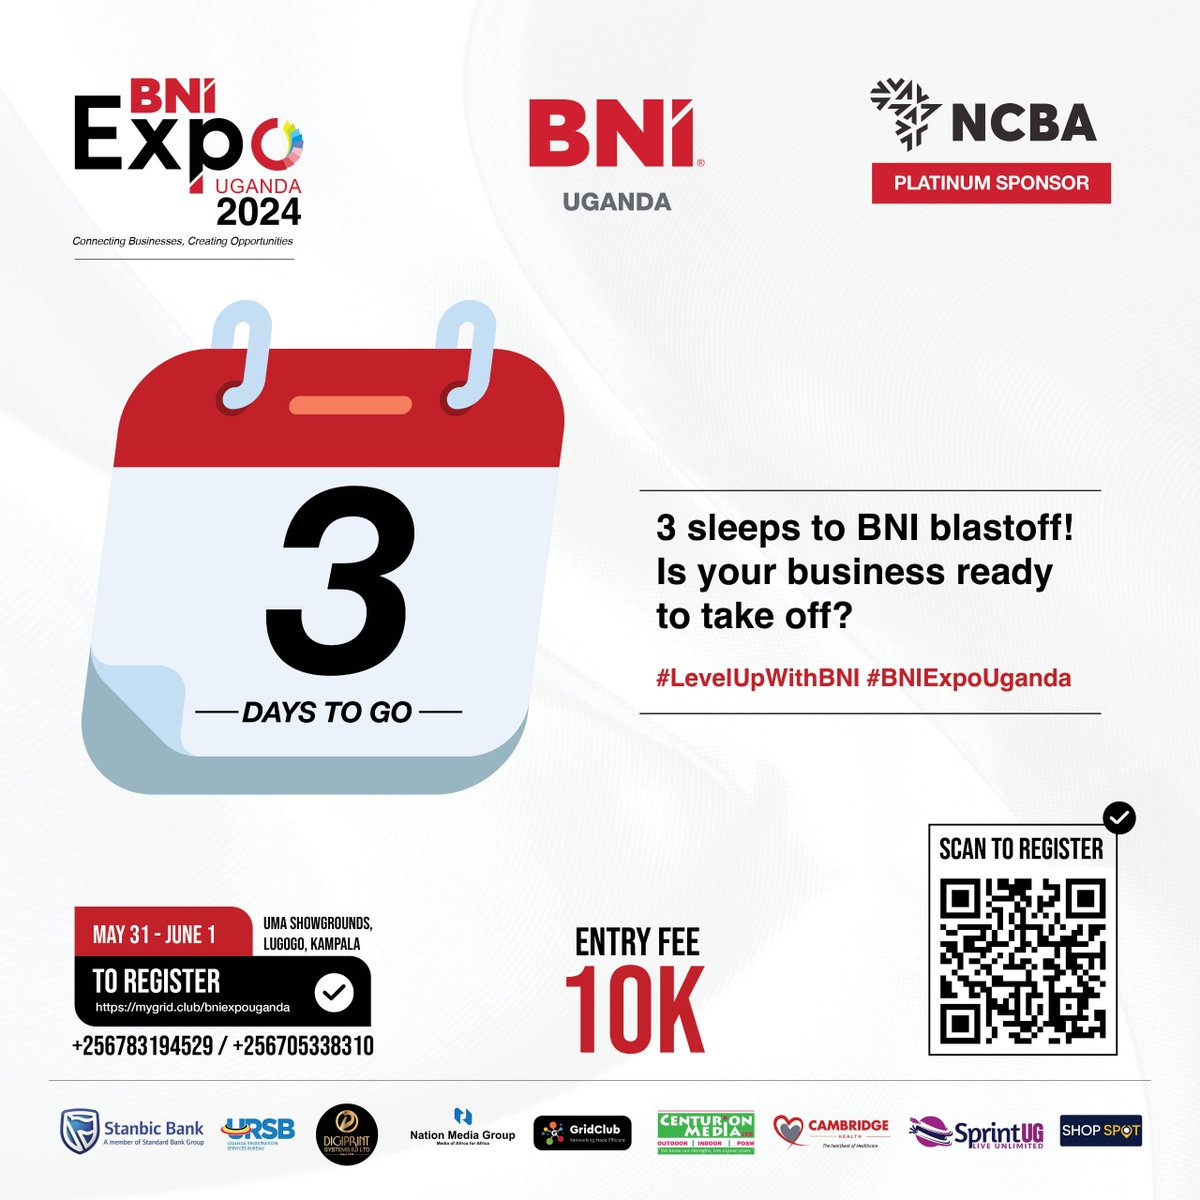 The #BNIExpo2024 runs from Friday May 31st to Saturday June 1st at UMA Showgrounds, Lugogo. The expo is an avenue for business mentorships, interactions and networking. Running a start-up that could use some inspiration or interest potential partners? This is the place to be.